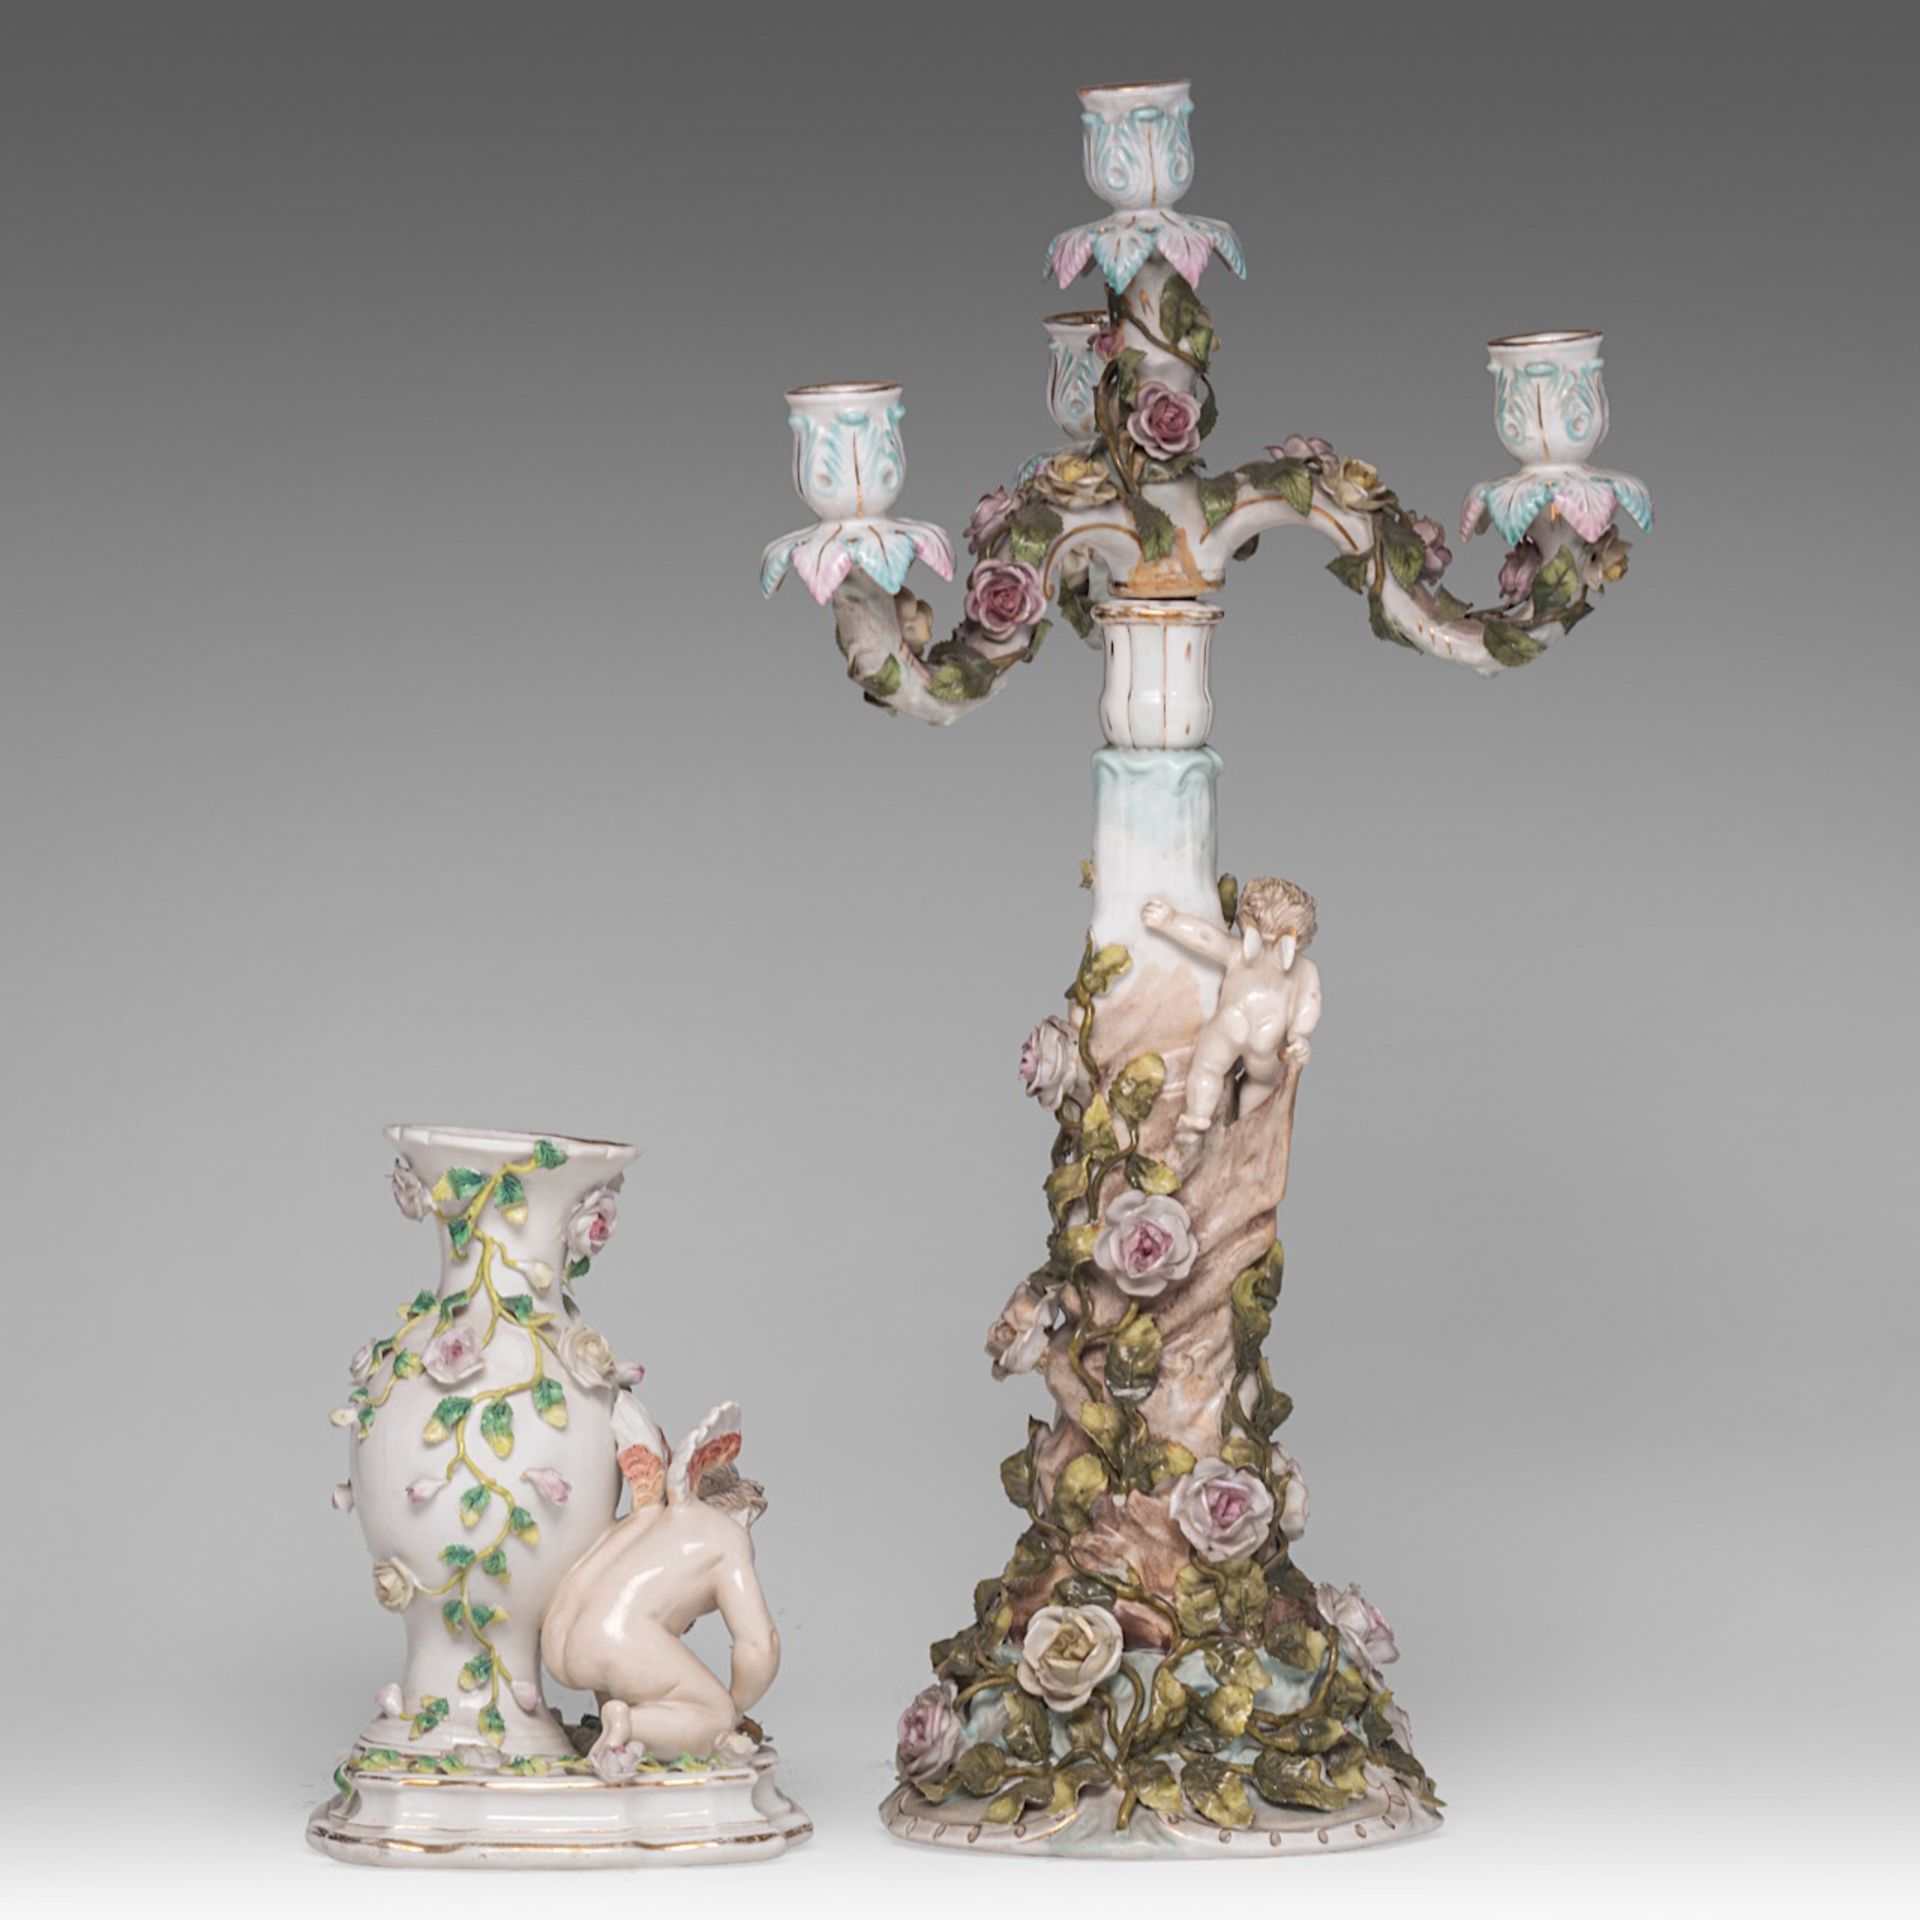 A collection of polychrome decorated Saxon porcelain figurines and a candelabra, H 51,5 cm (tallest) - Bild 5 aus 13